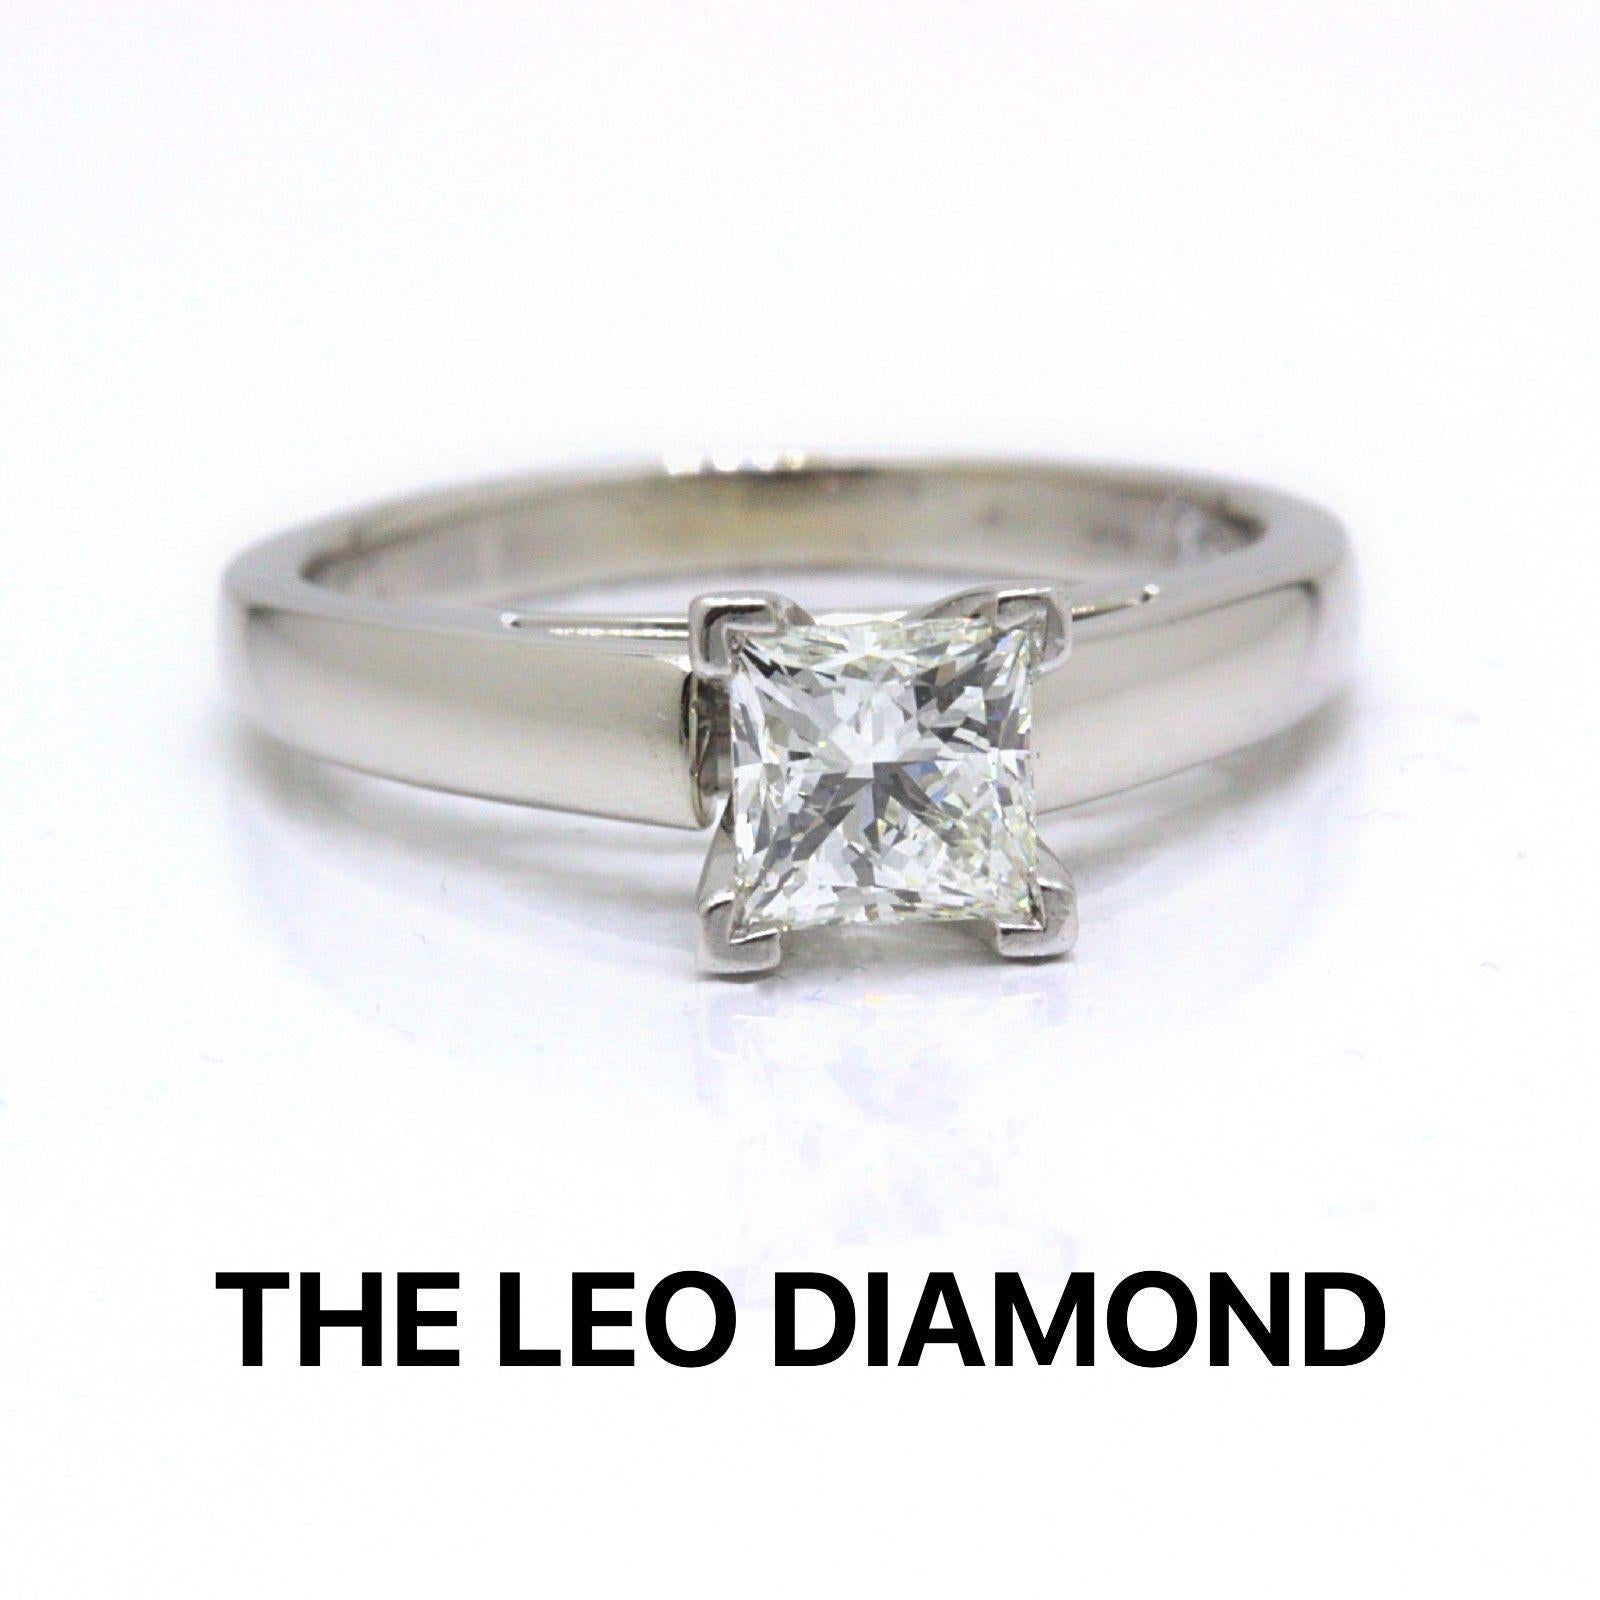 The Leo Diamond
Style:  4 Prong Solitaire Artisan Ring
Serial Number:  LEO 142600S
Metal:  14KT White Gold & Platinum Prongs
Size:   5.5 (sizable)
Total Carat Weight:  0.75 CTS
Diamond Shape:  Leo Princess
Diamond Color & Clarity:  I  / 